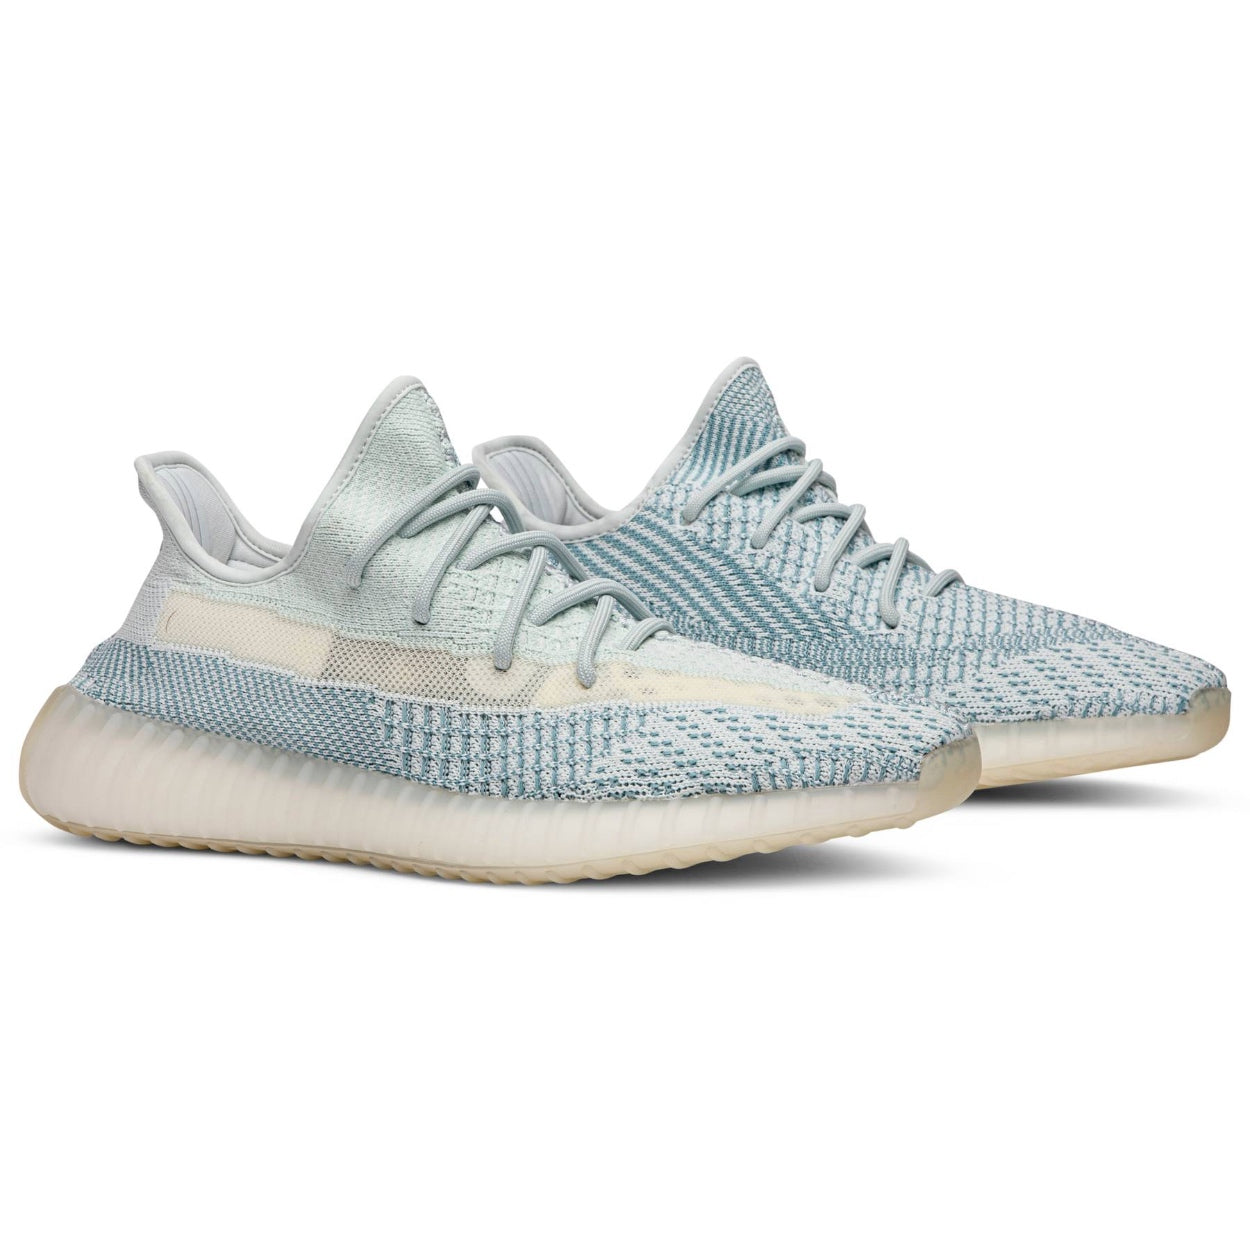 adidas Yeezy Boost 350 V2 'Cloud White Non-Reflective' - After Burn